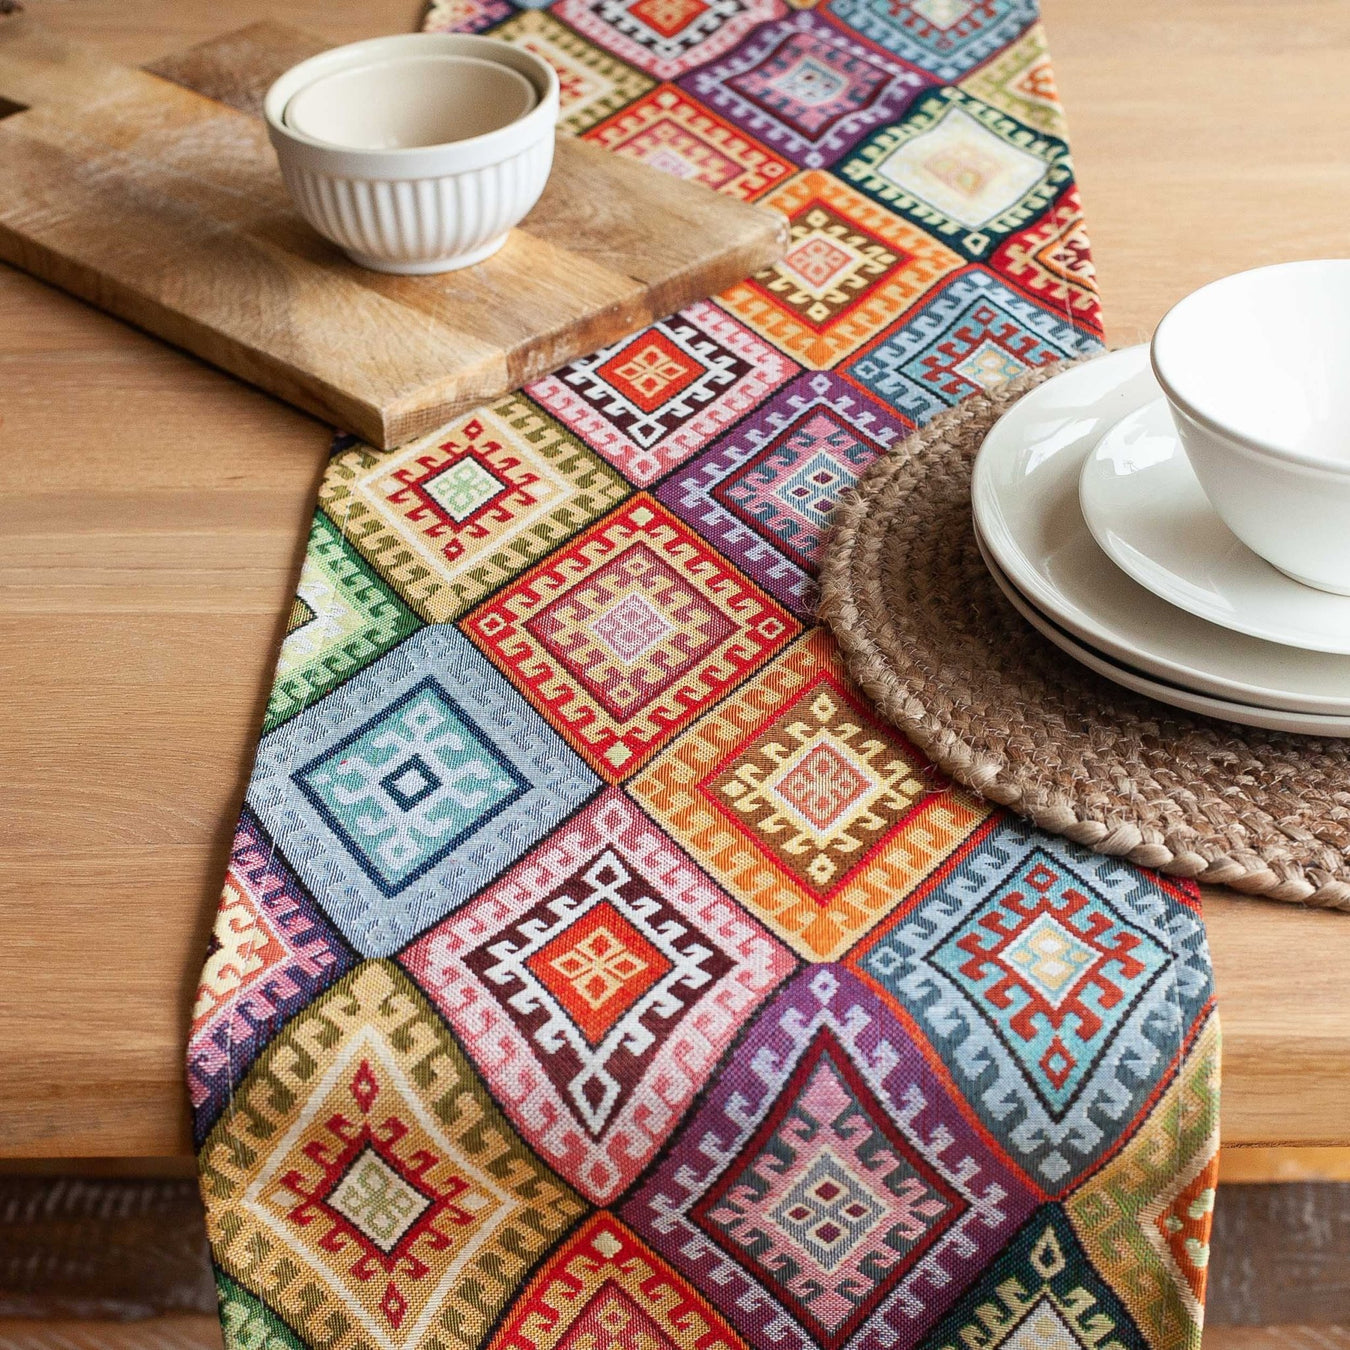 Table Covers & More - Aladdin - Shop Authentic Turkish Products